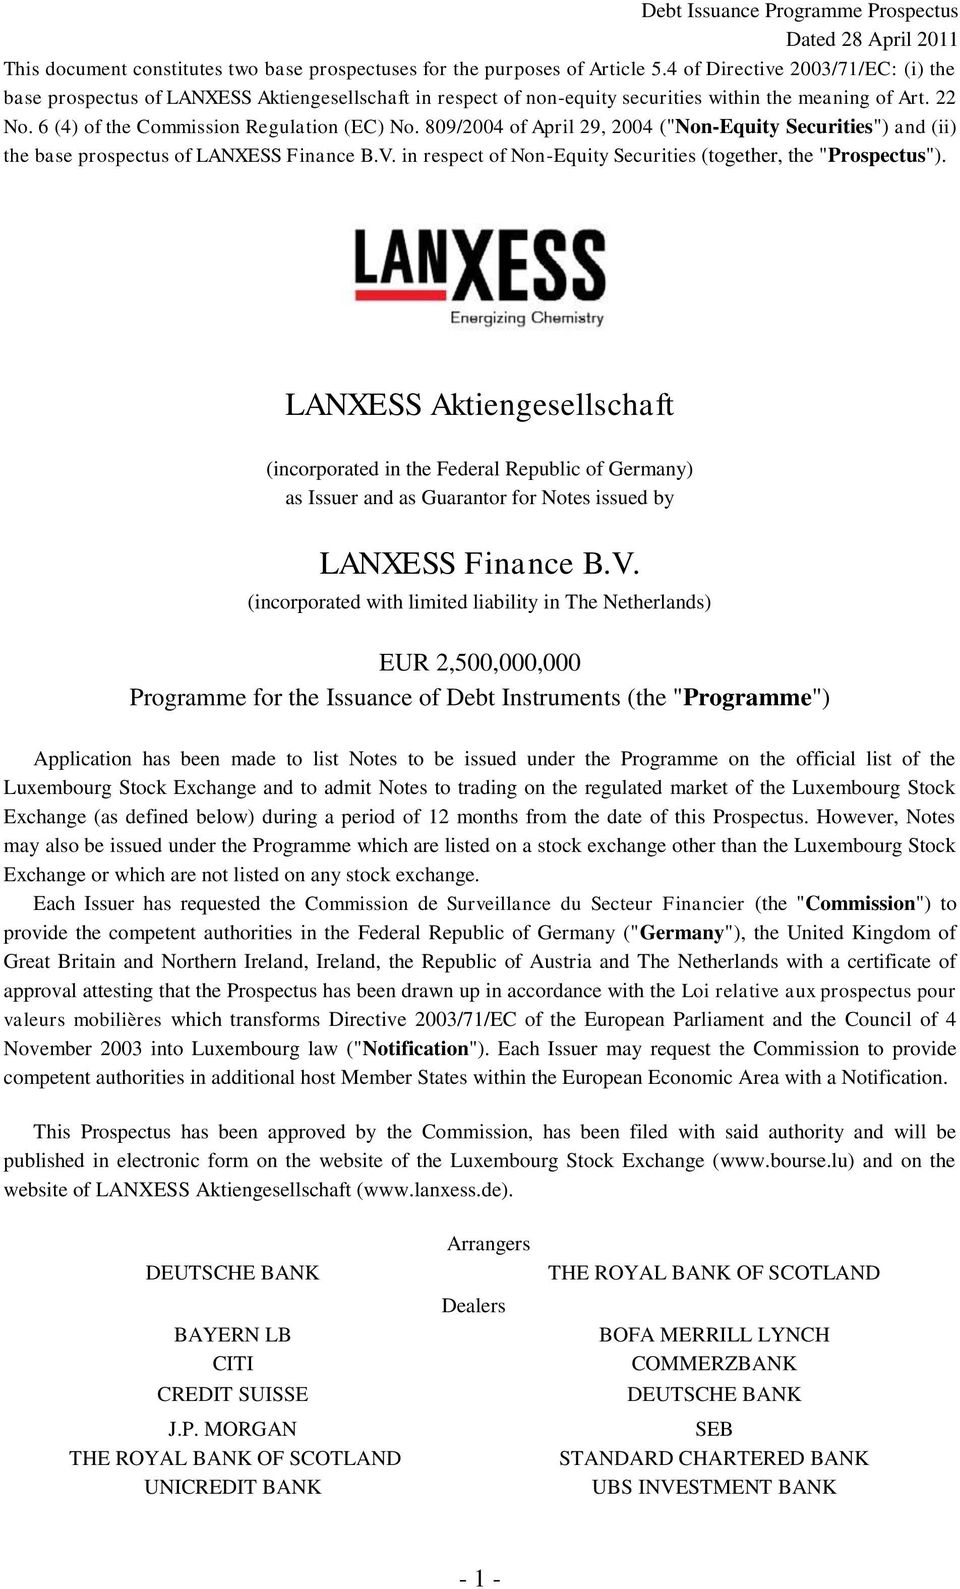 809/2004 of April 29, 2004 ("Non-Equity Securities") and (ii) the base prospectus of LANXESS Finance B.V. in respect of Non-Equity Securities (together, the "Prospectus").